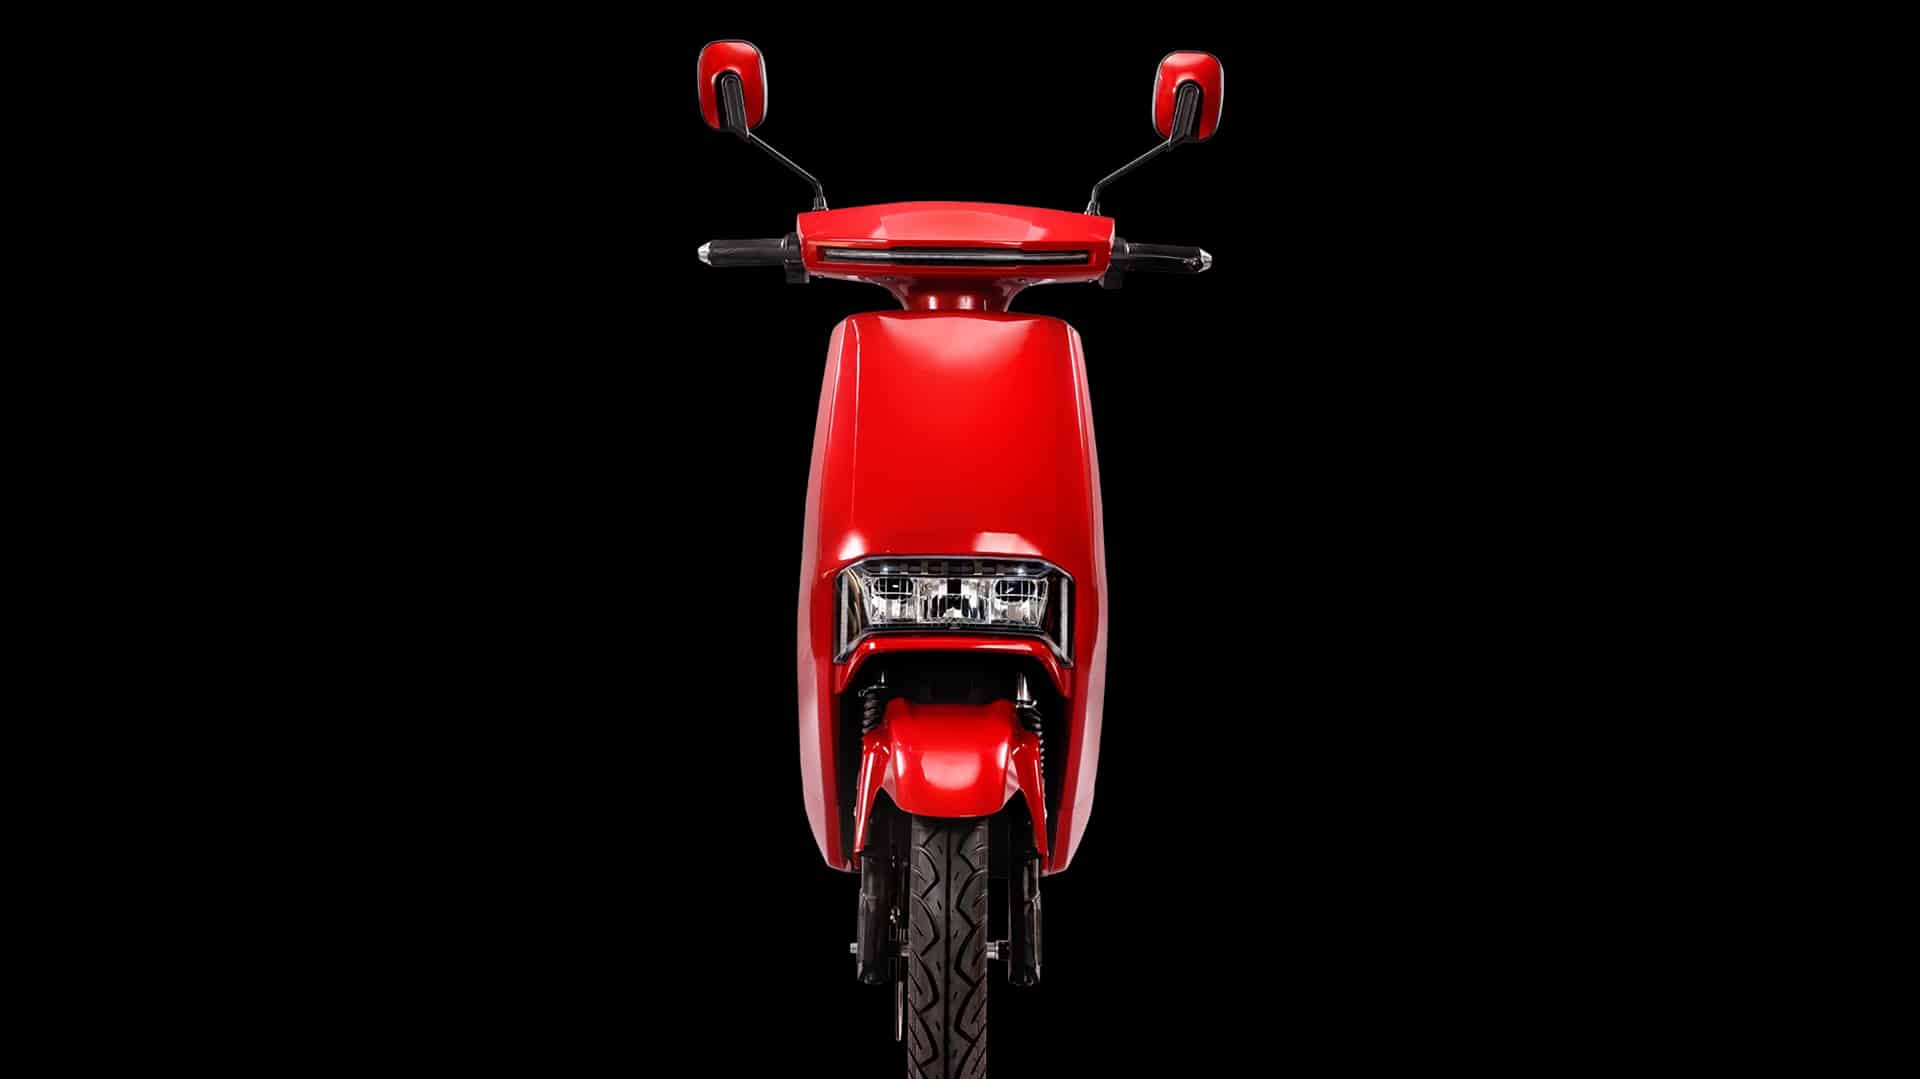 Electric two-wheeler startup Odysse launches new scooter model